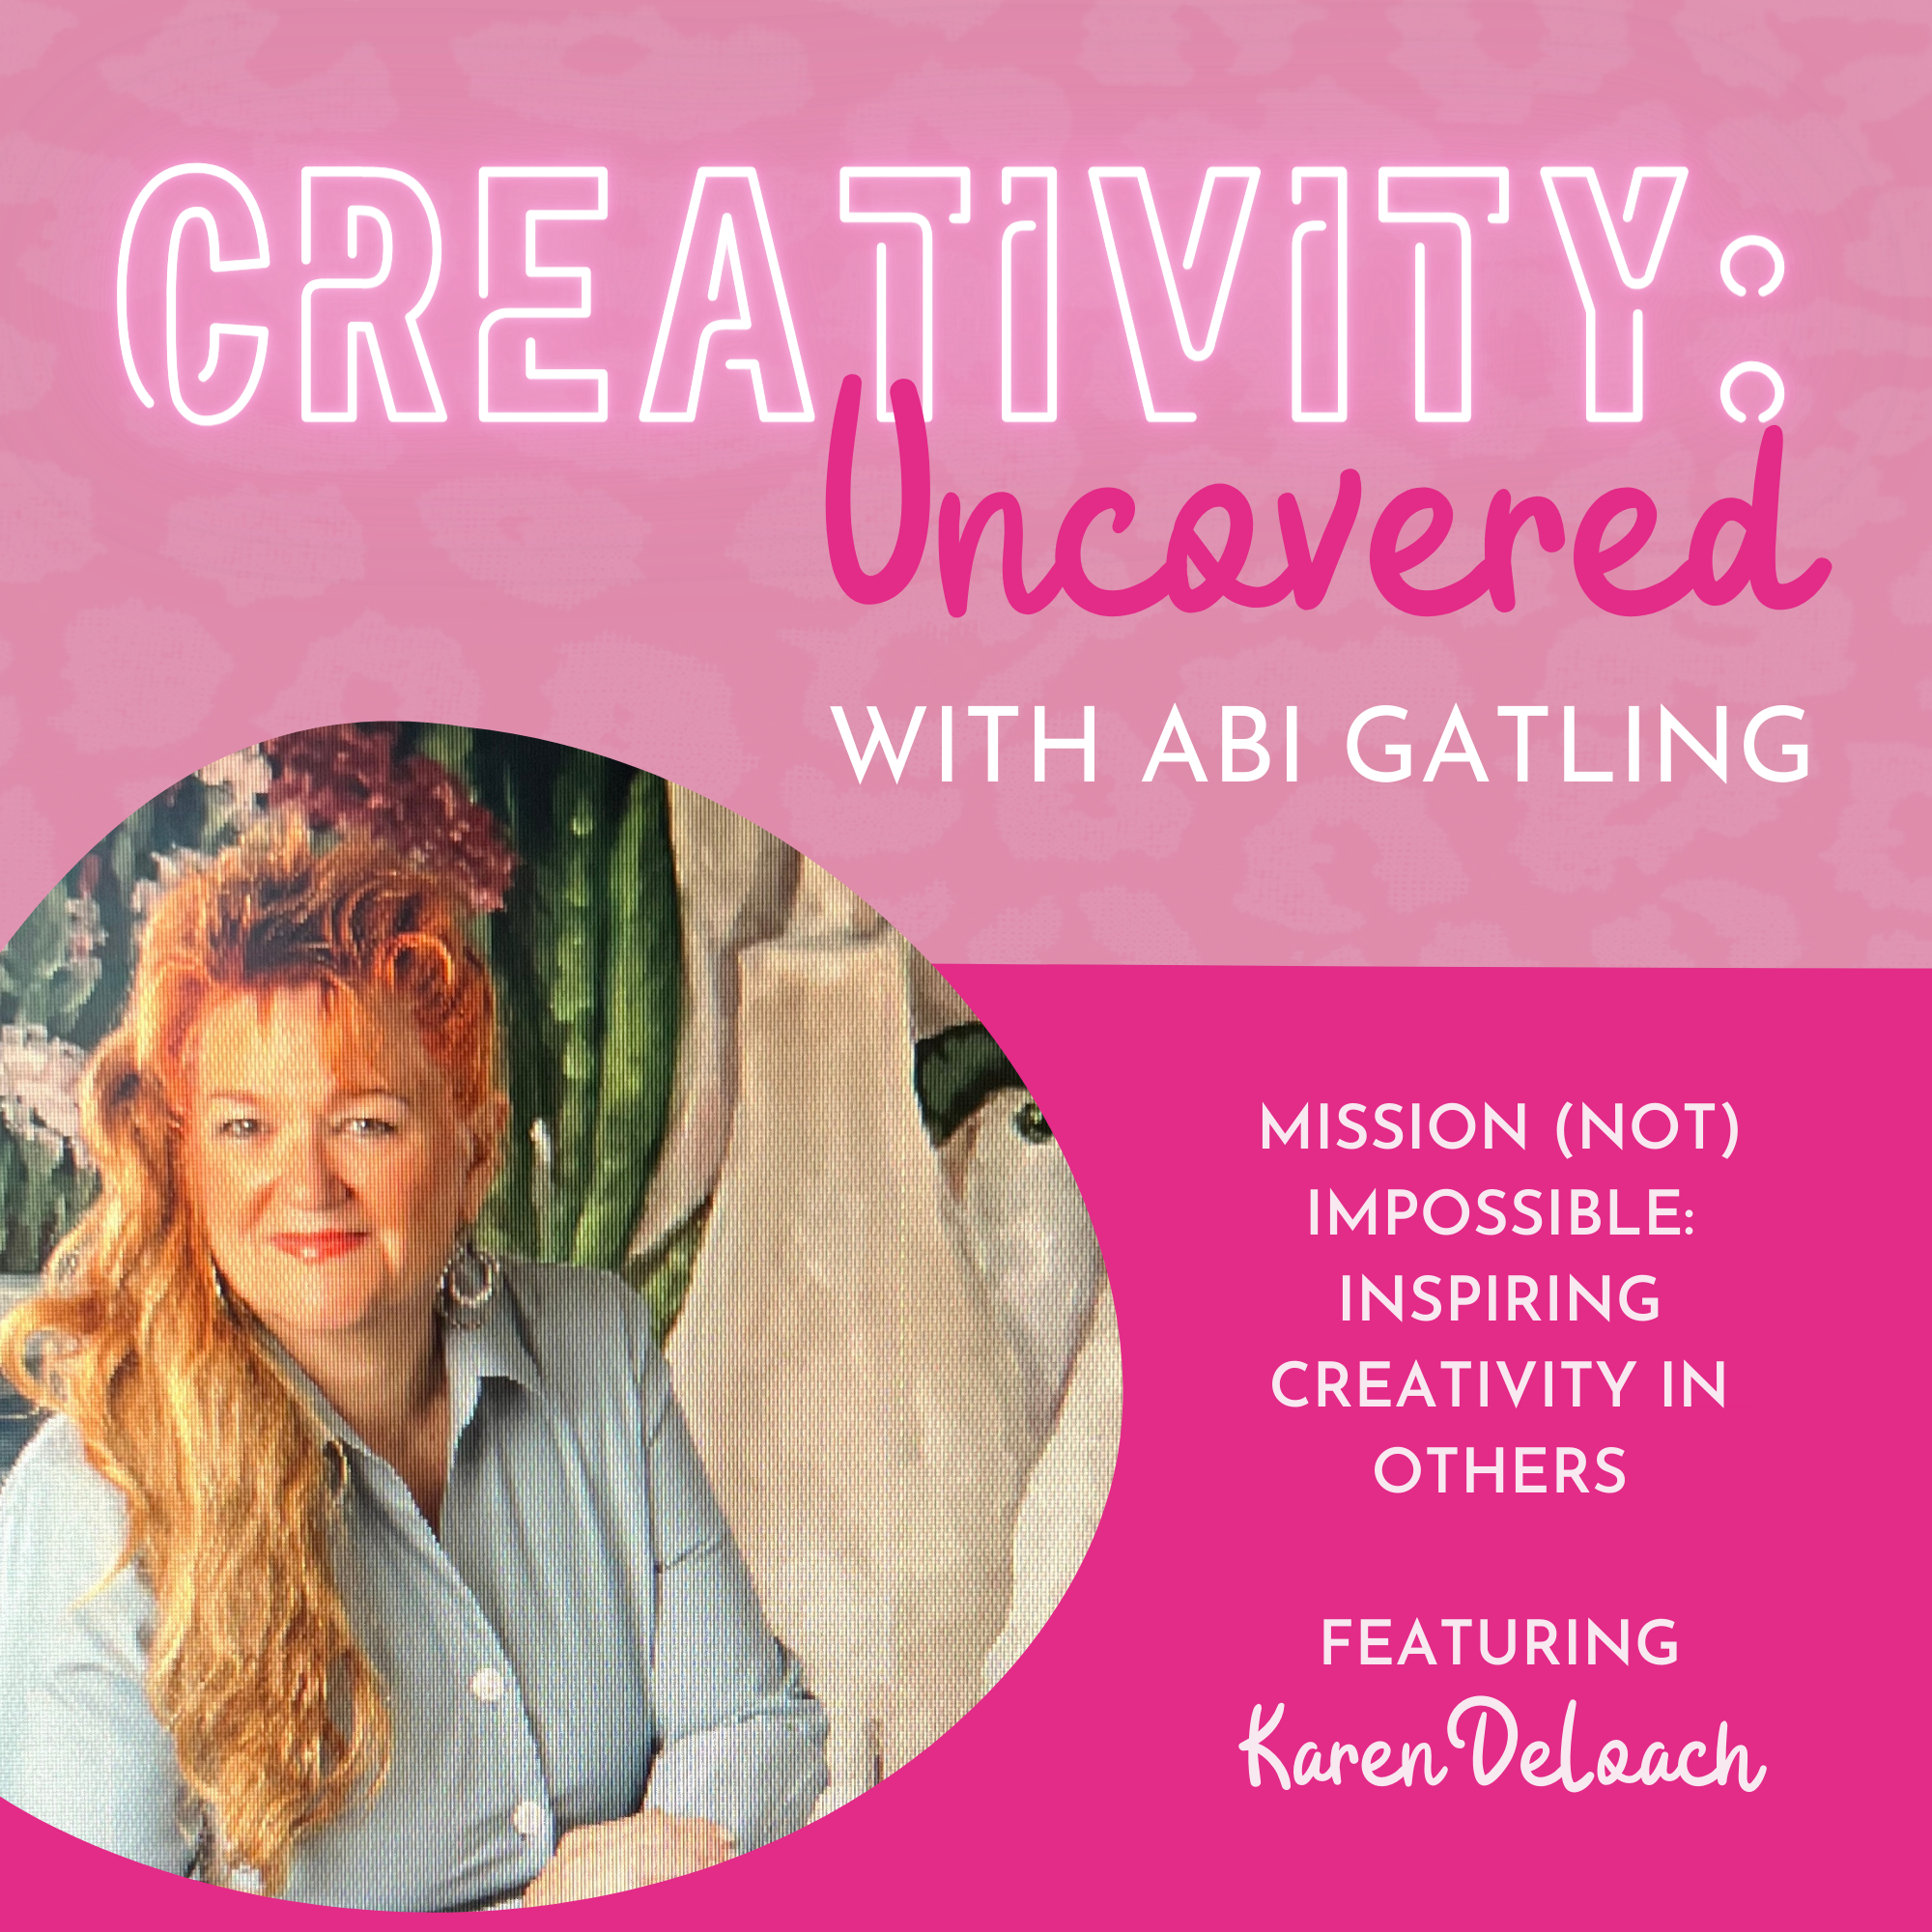 Creativity: Uncovered podcast episode graphic featuring guest Karen DeLoach